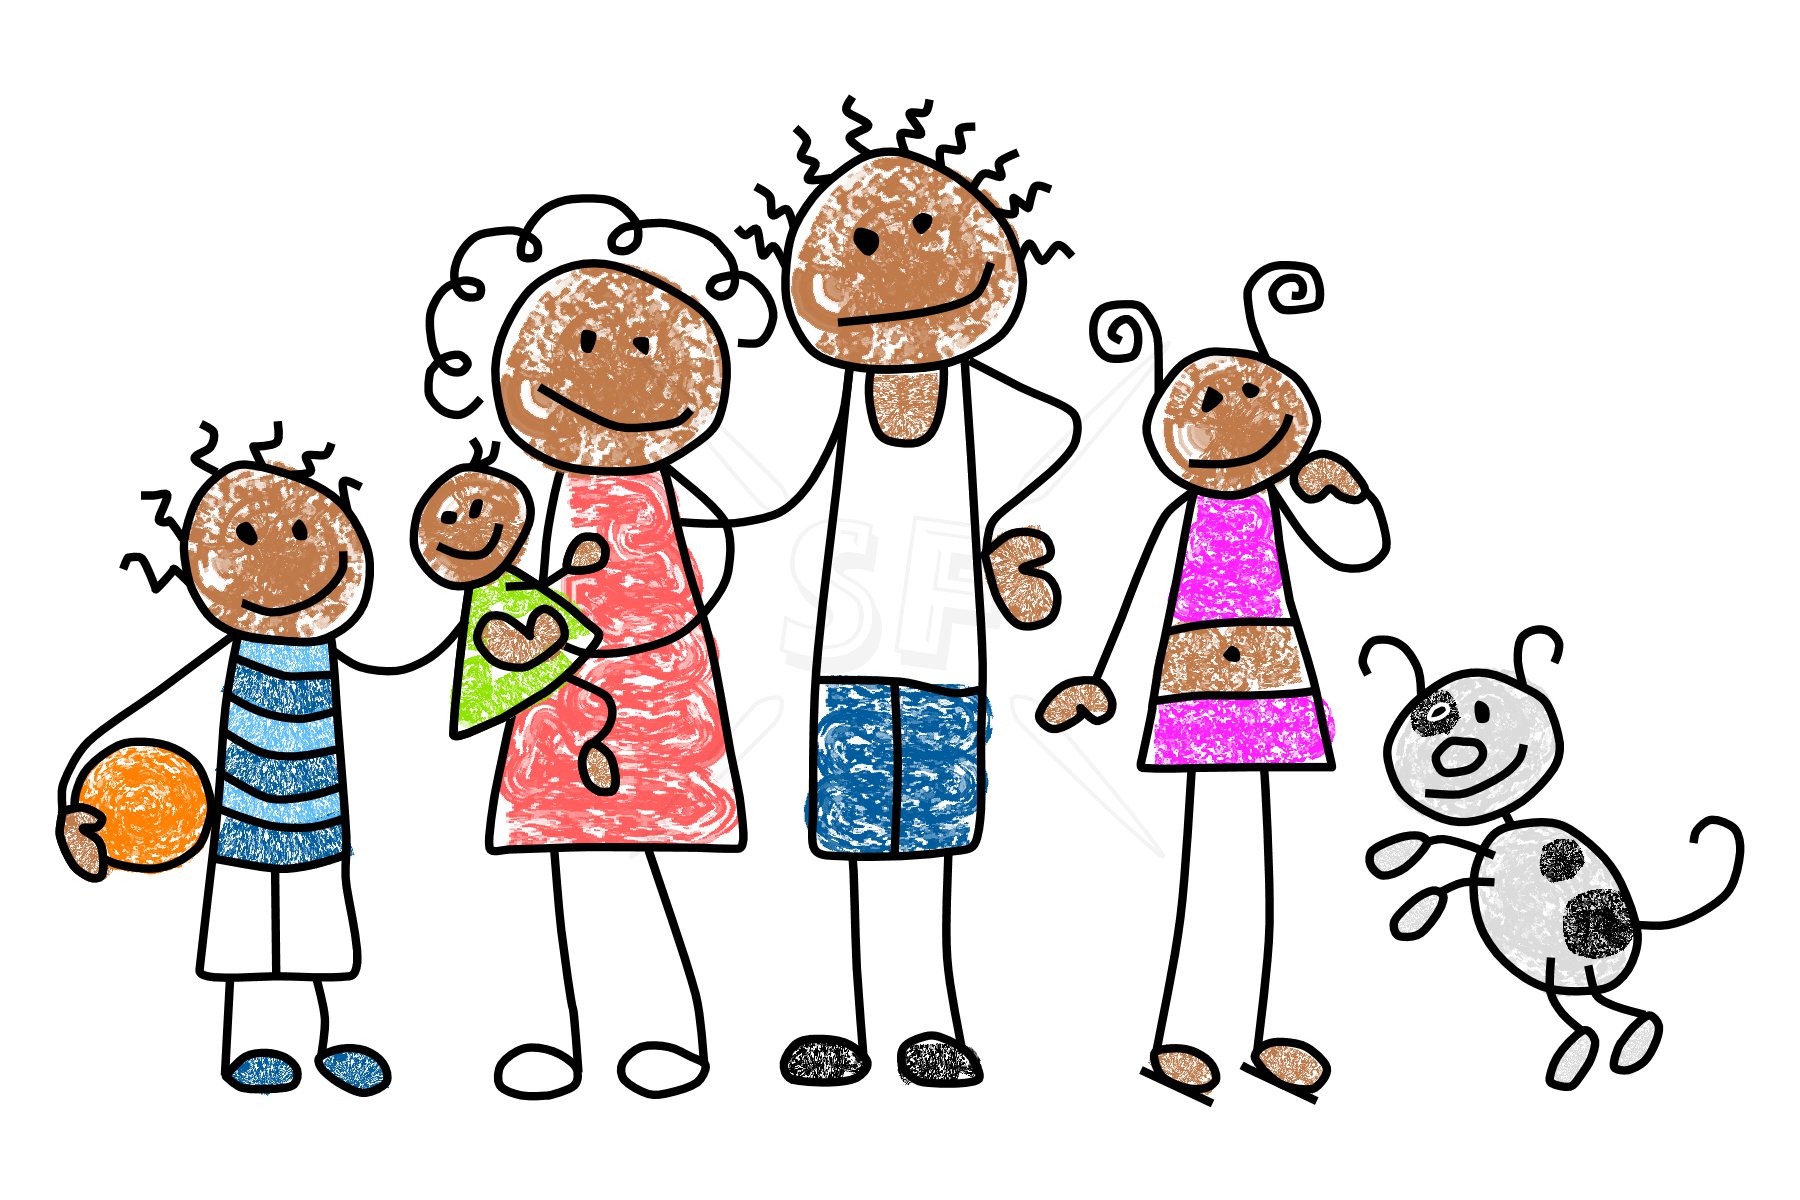 Our family clipart free clip 